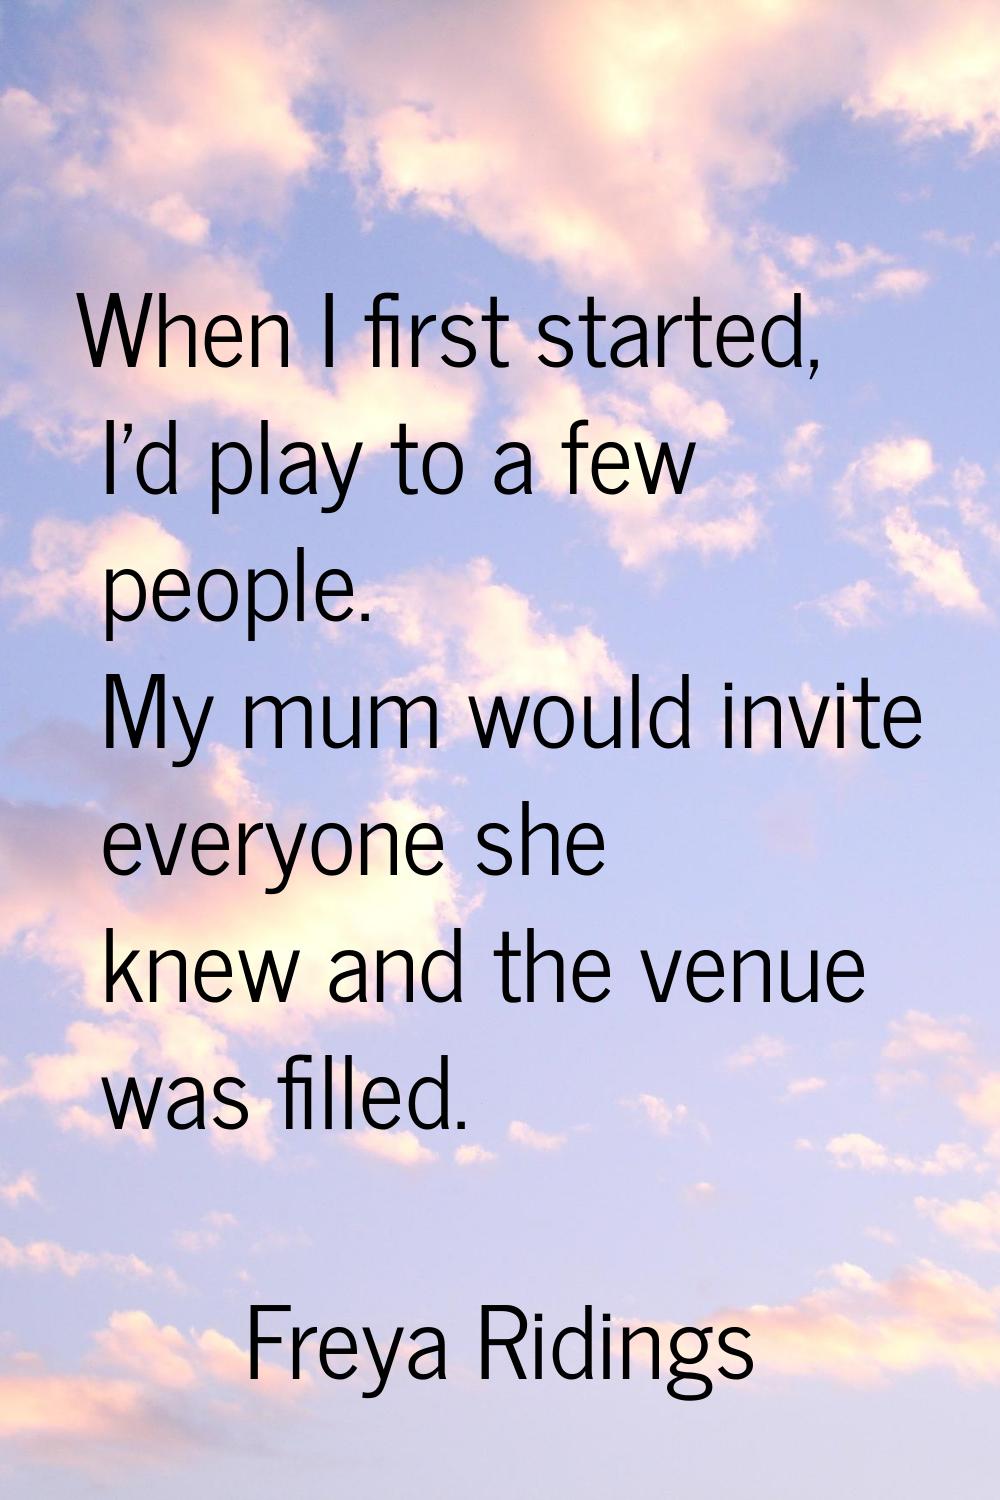 When I first started, I'd play to a few people. My mum would invite everyone she knew and the venue